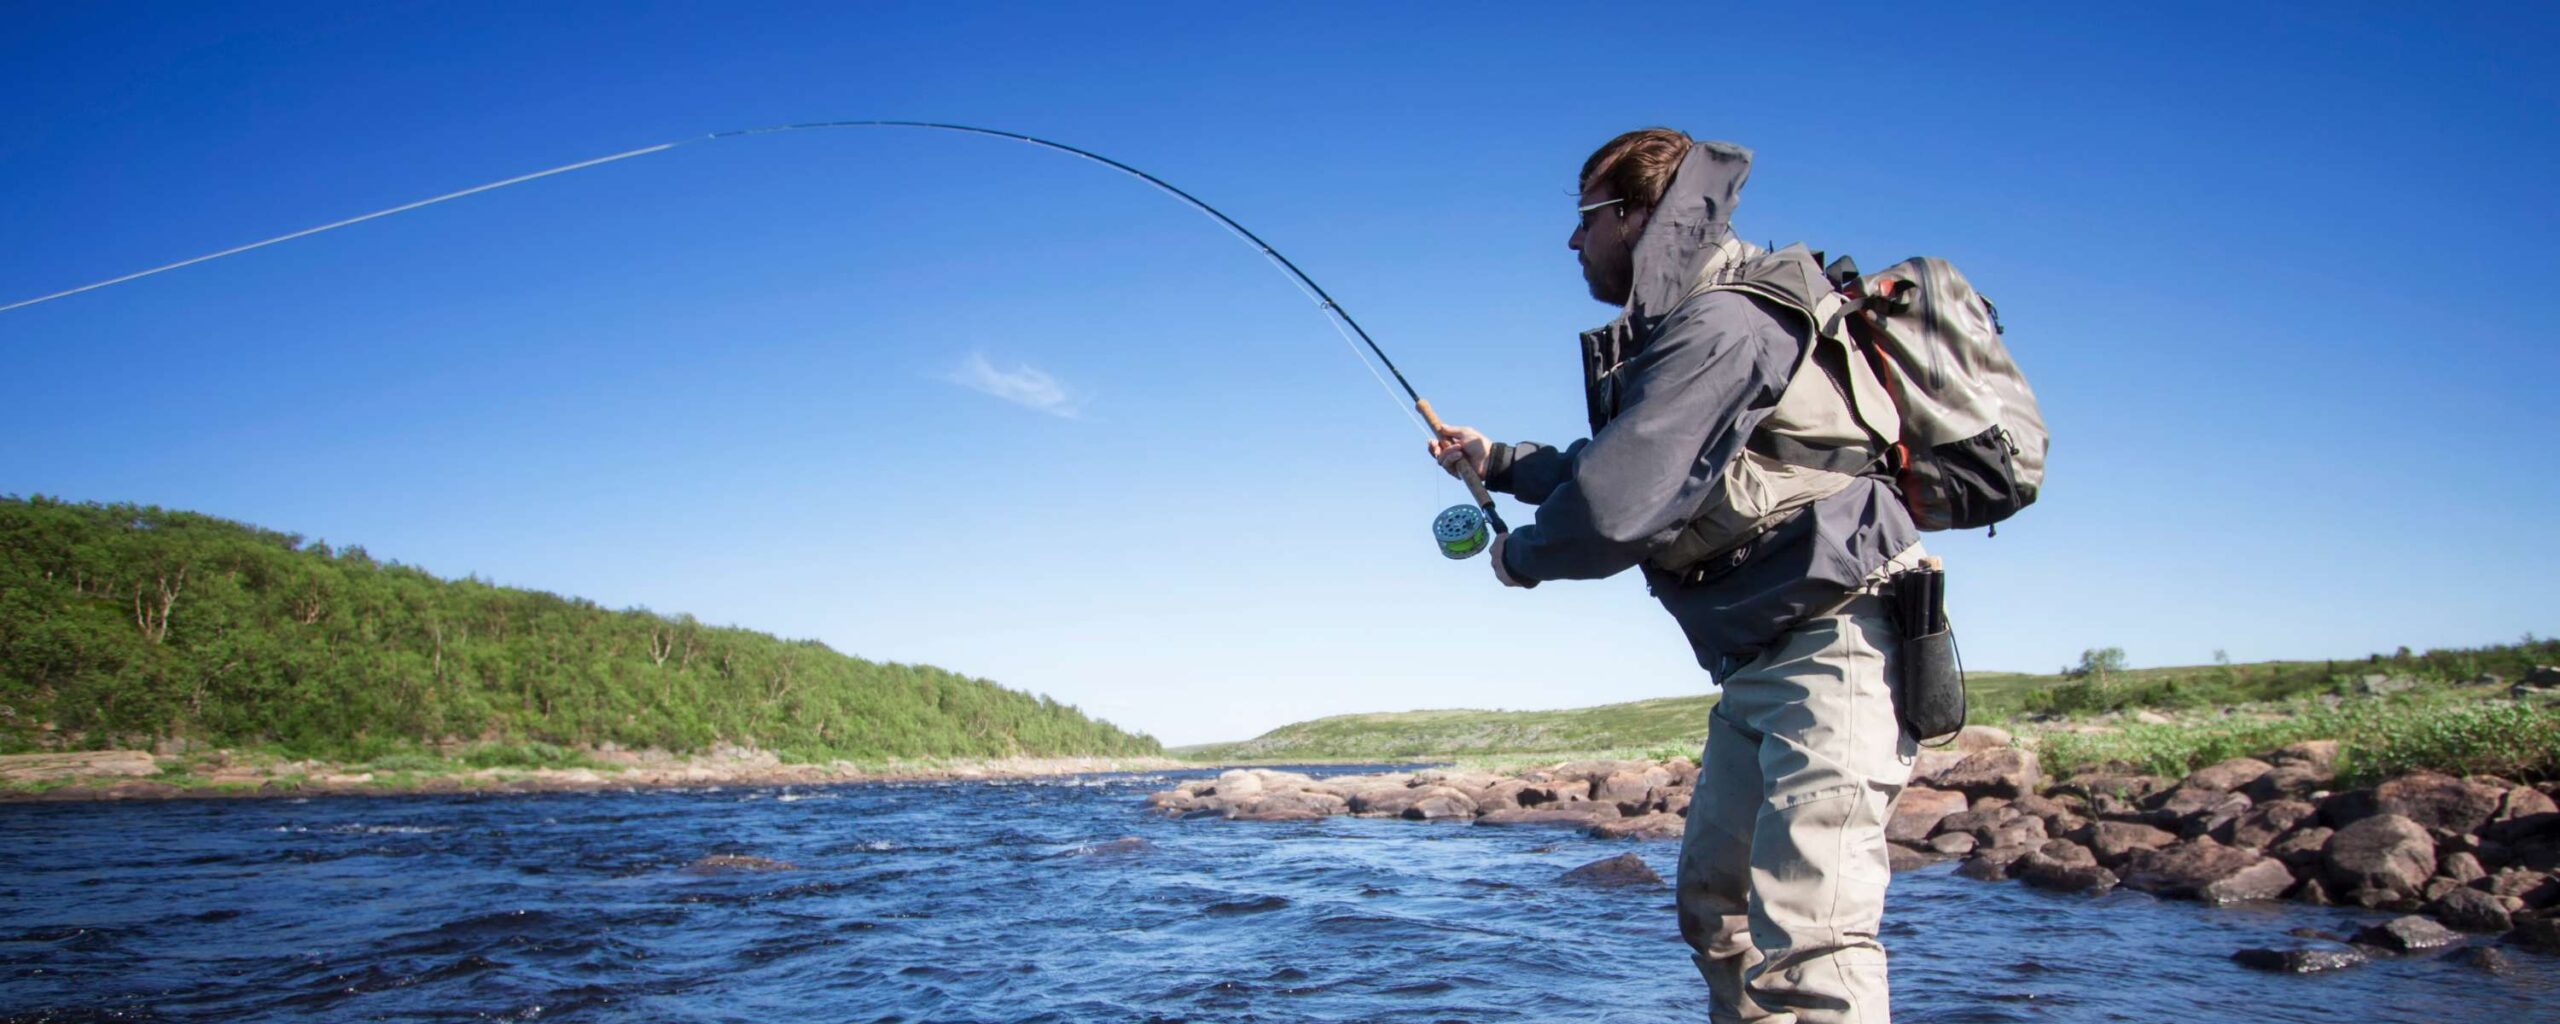 A man standing in a river fly fishing on a cloud free day